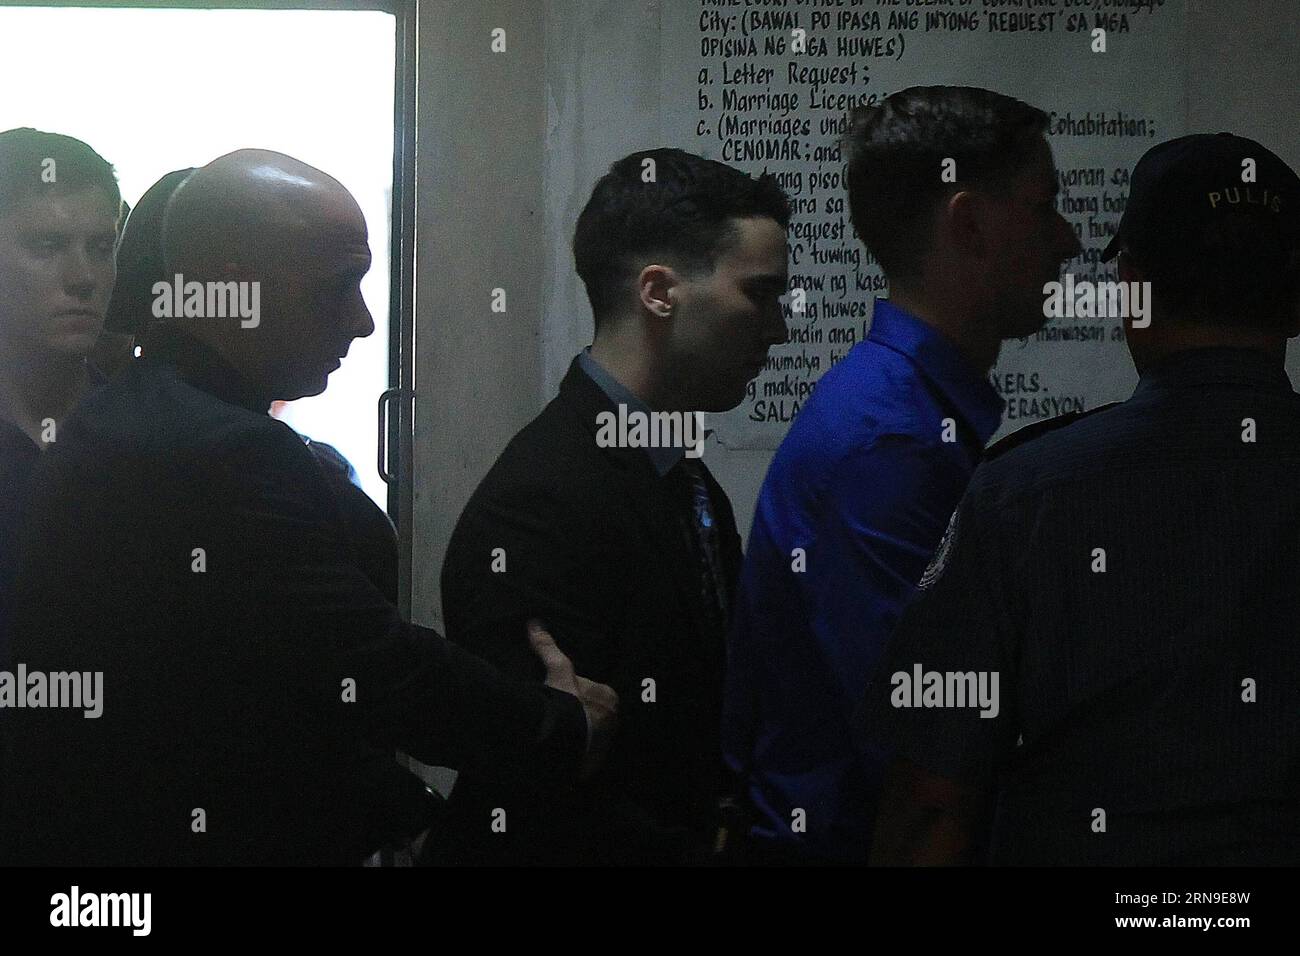 (151201) -- OLONGAPO CITY, Dec. 1, 2015 -- U.S. Marine Lance Corporal Joseph Scott Pemberton (C) is escorted by security personnel before the verdict on a murder case at the Regional Trial Court in Olongapo City, the Philippines, Dec. 1, 2015. Pemberton is found guilty of homicide in the killing of Filipino transgender Jeffery Jennifer Laude and will face a 6 to 12 years of imprisonment at the Armed Forces of the Philippines (AFP) Custodial Center. ) PHILIPPINES-OLONGAPO CITY-U.S. MARINE-MURDER RouellexUmali PUBLICATIONxNOTxINxCHN   151201 Olongapo City DEC 1 2015 U S Navy Lance Corporal Josep Stock Photo